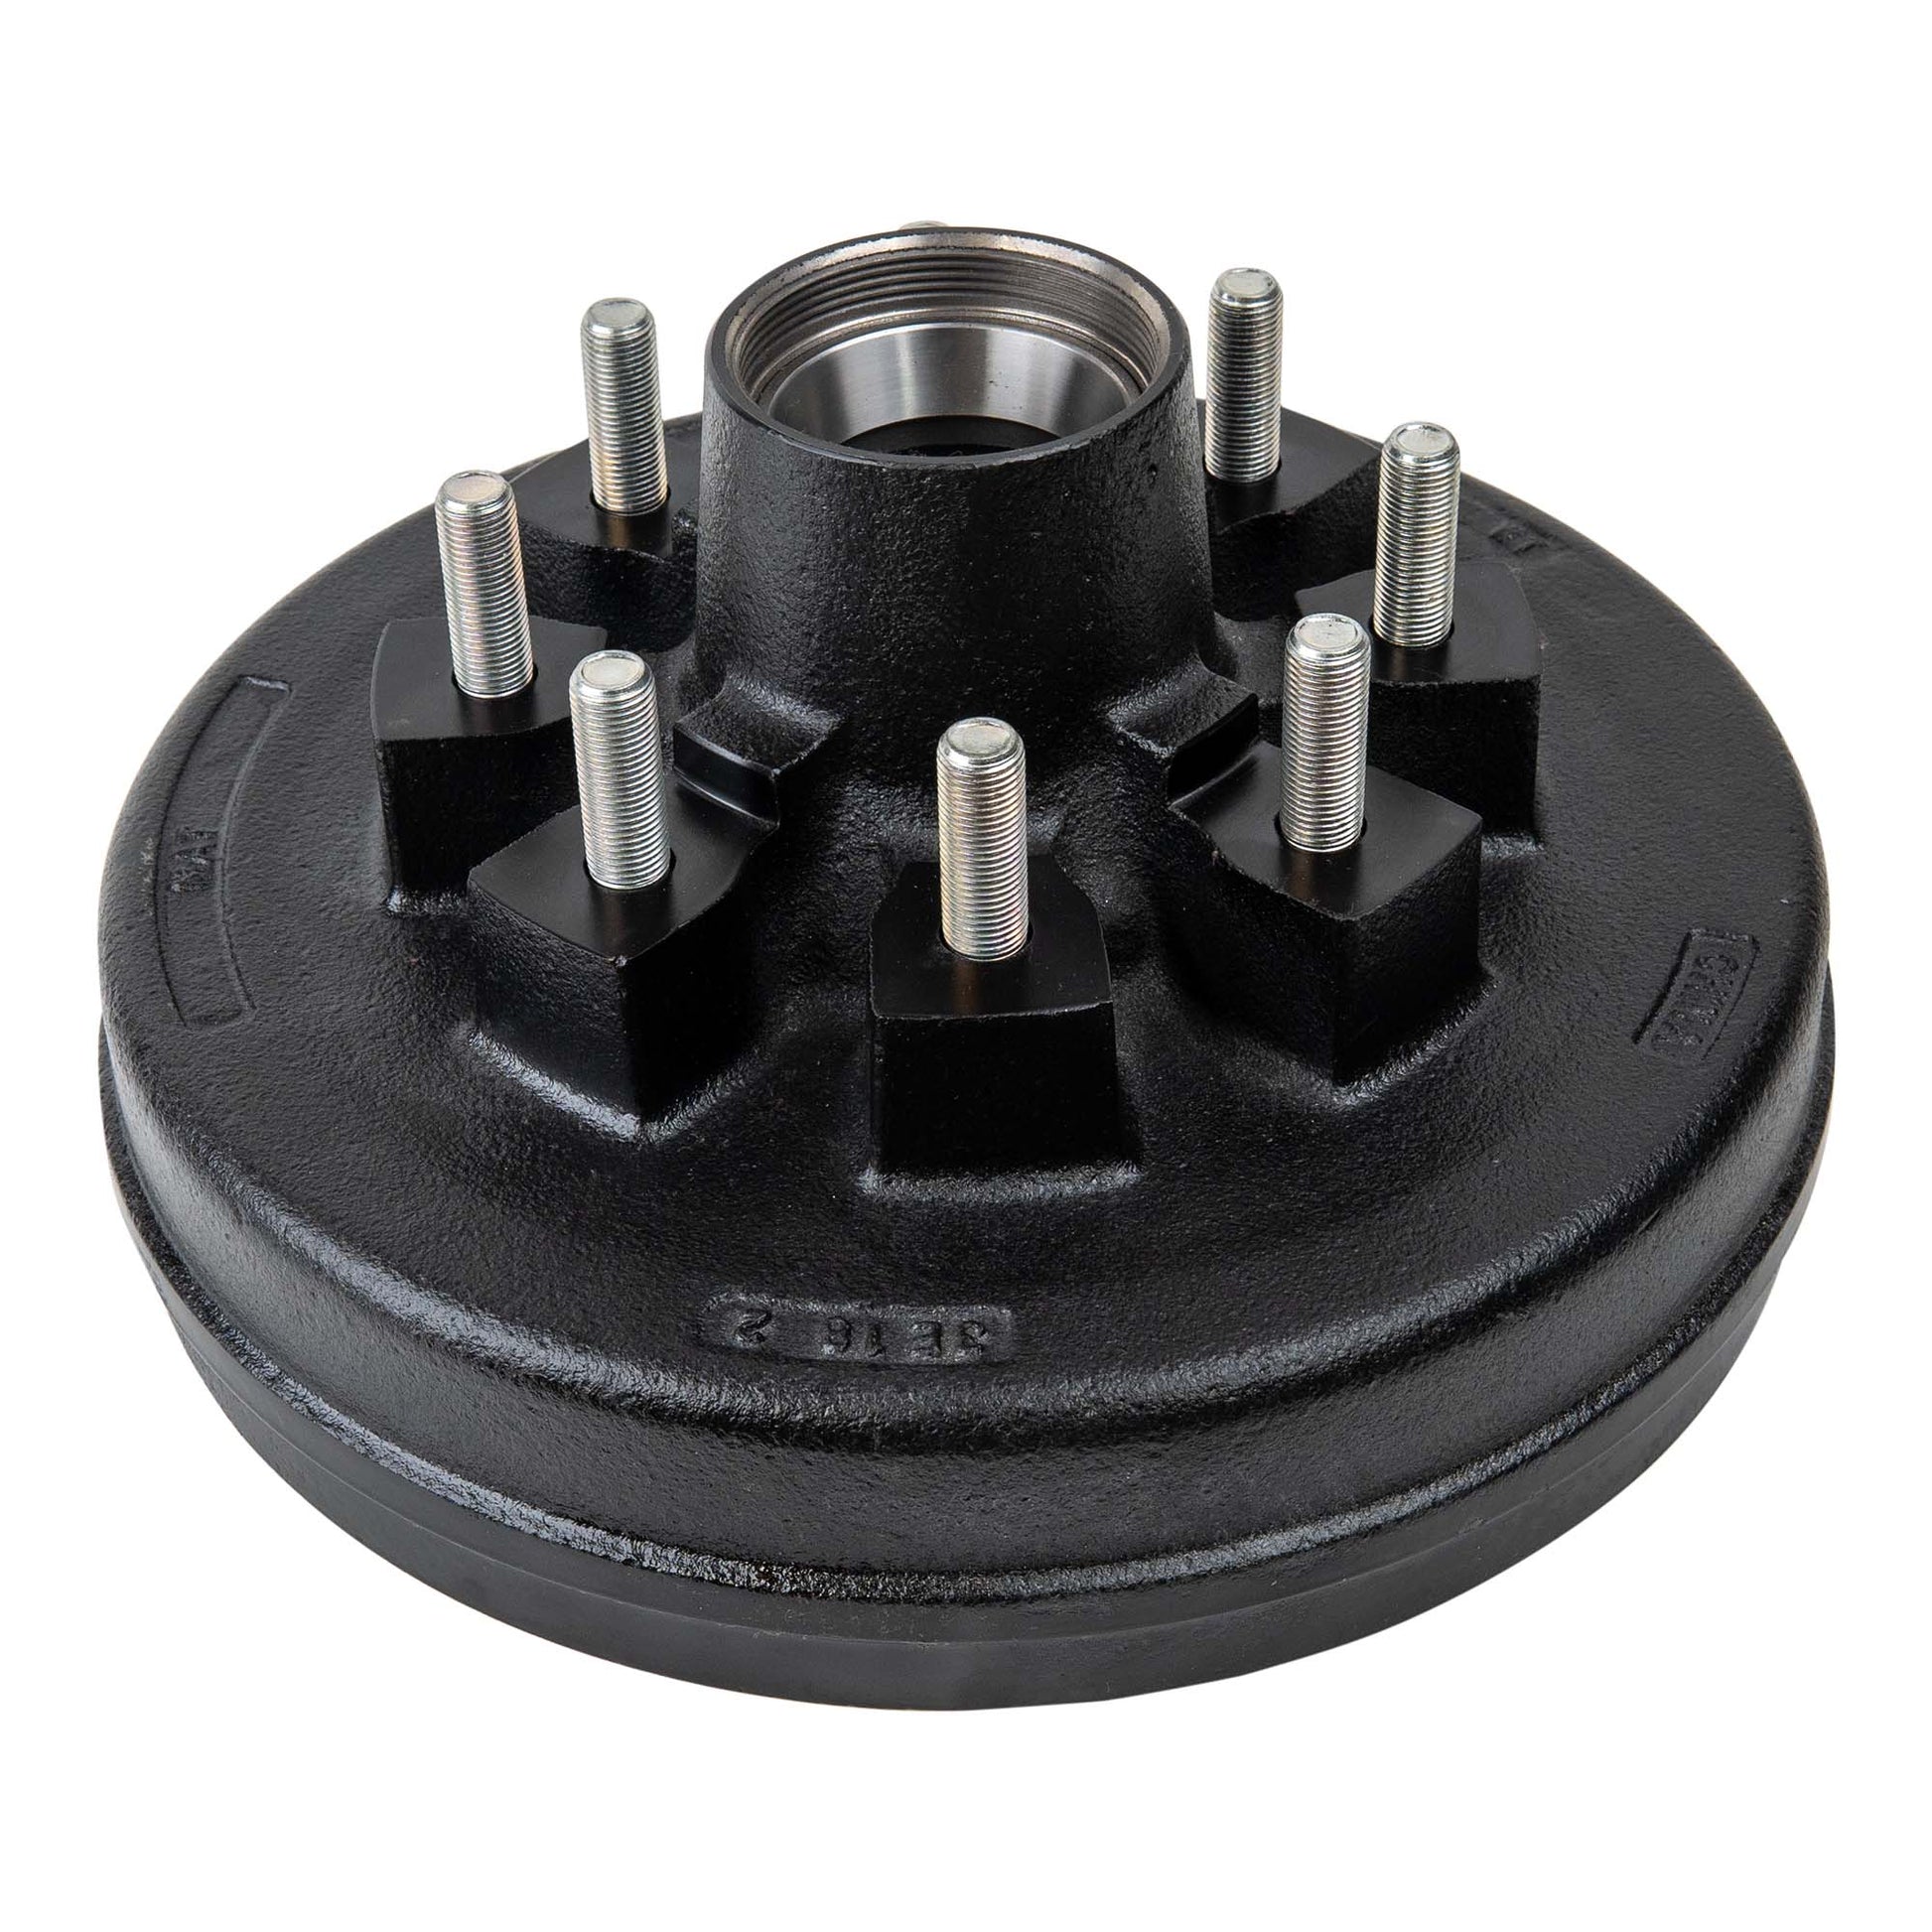 8k Trailer Axle Grease Hub and Drum - 8 lug - 9/16" - Hybrid - The Trailer Parts Outlet